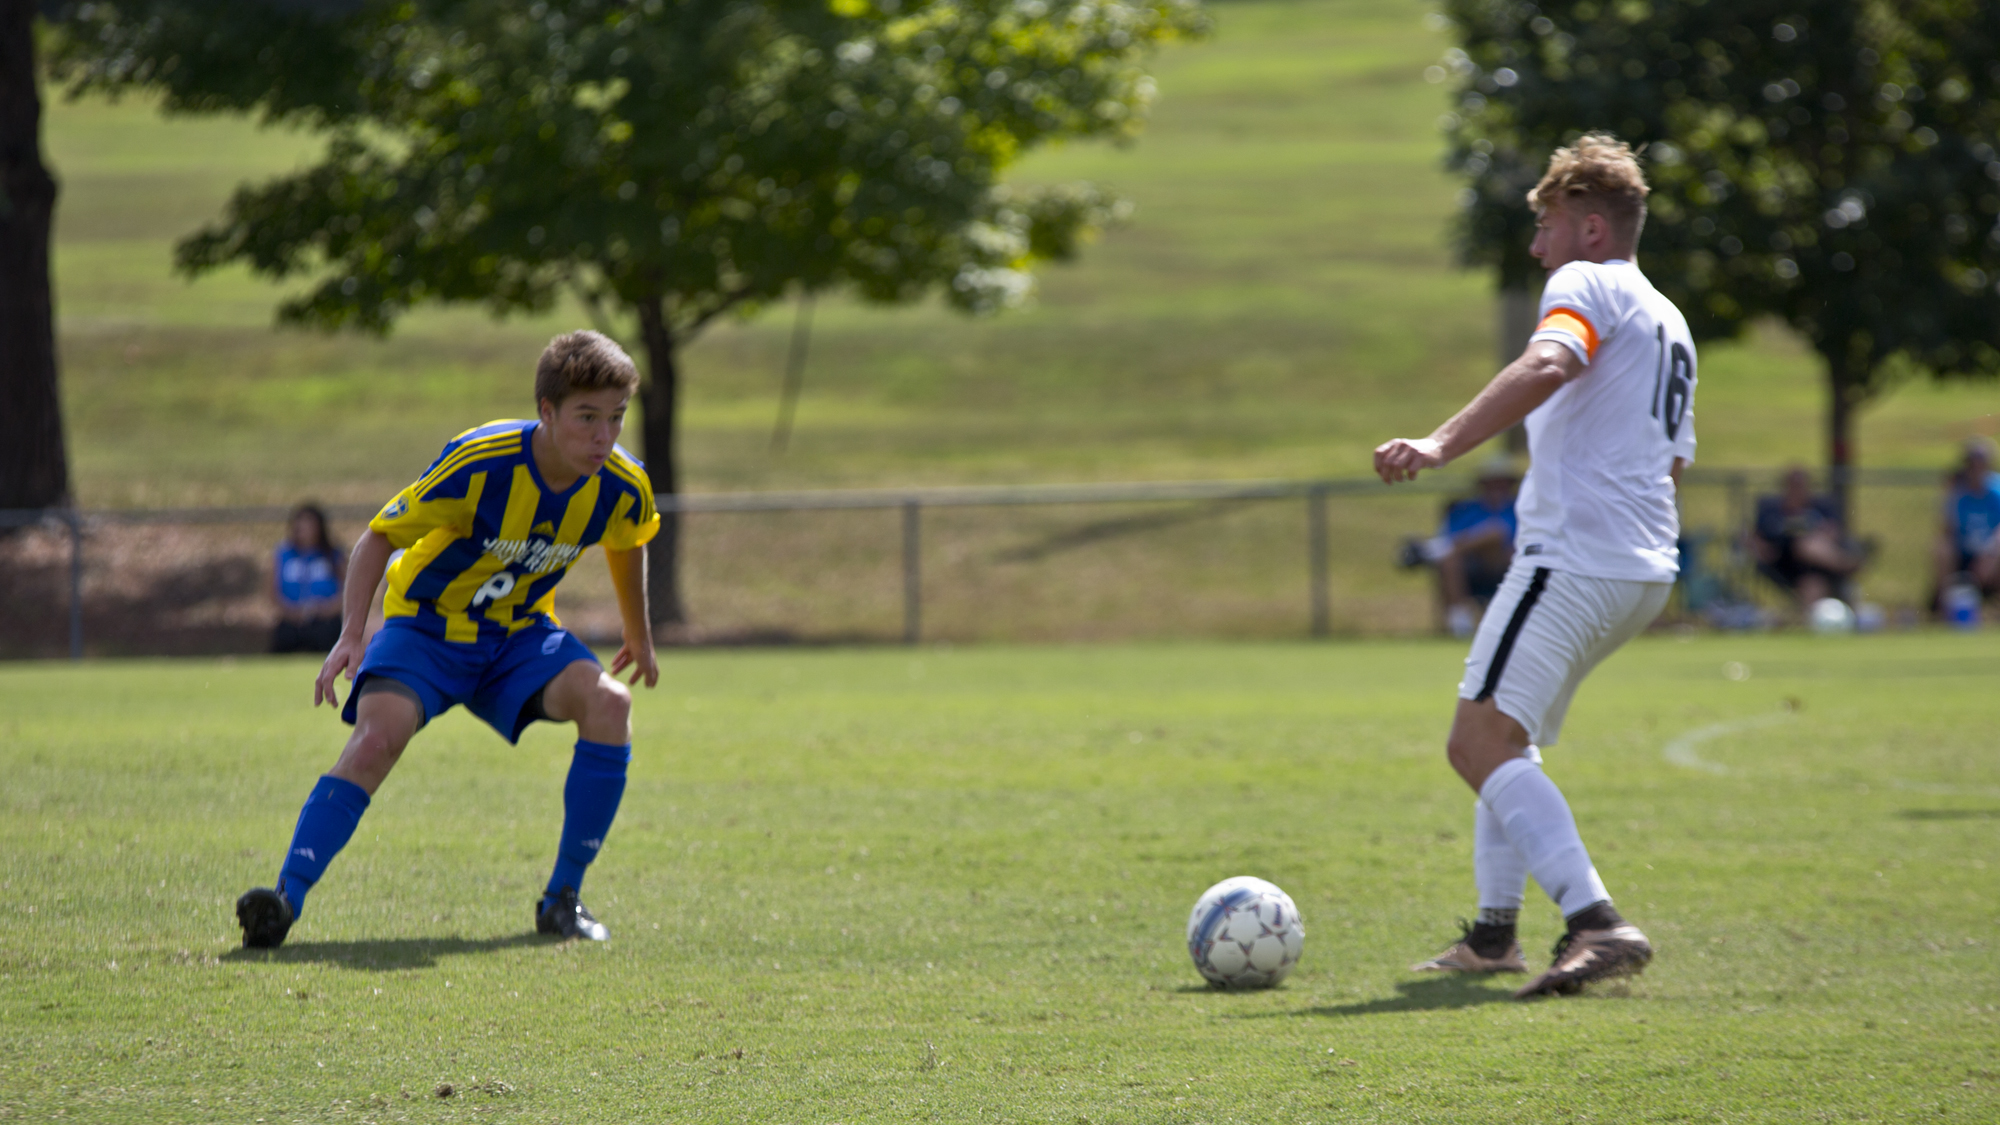 Quick start sends men's soccer to overwhelming 4-0 win at MACU